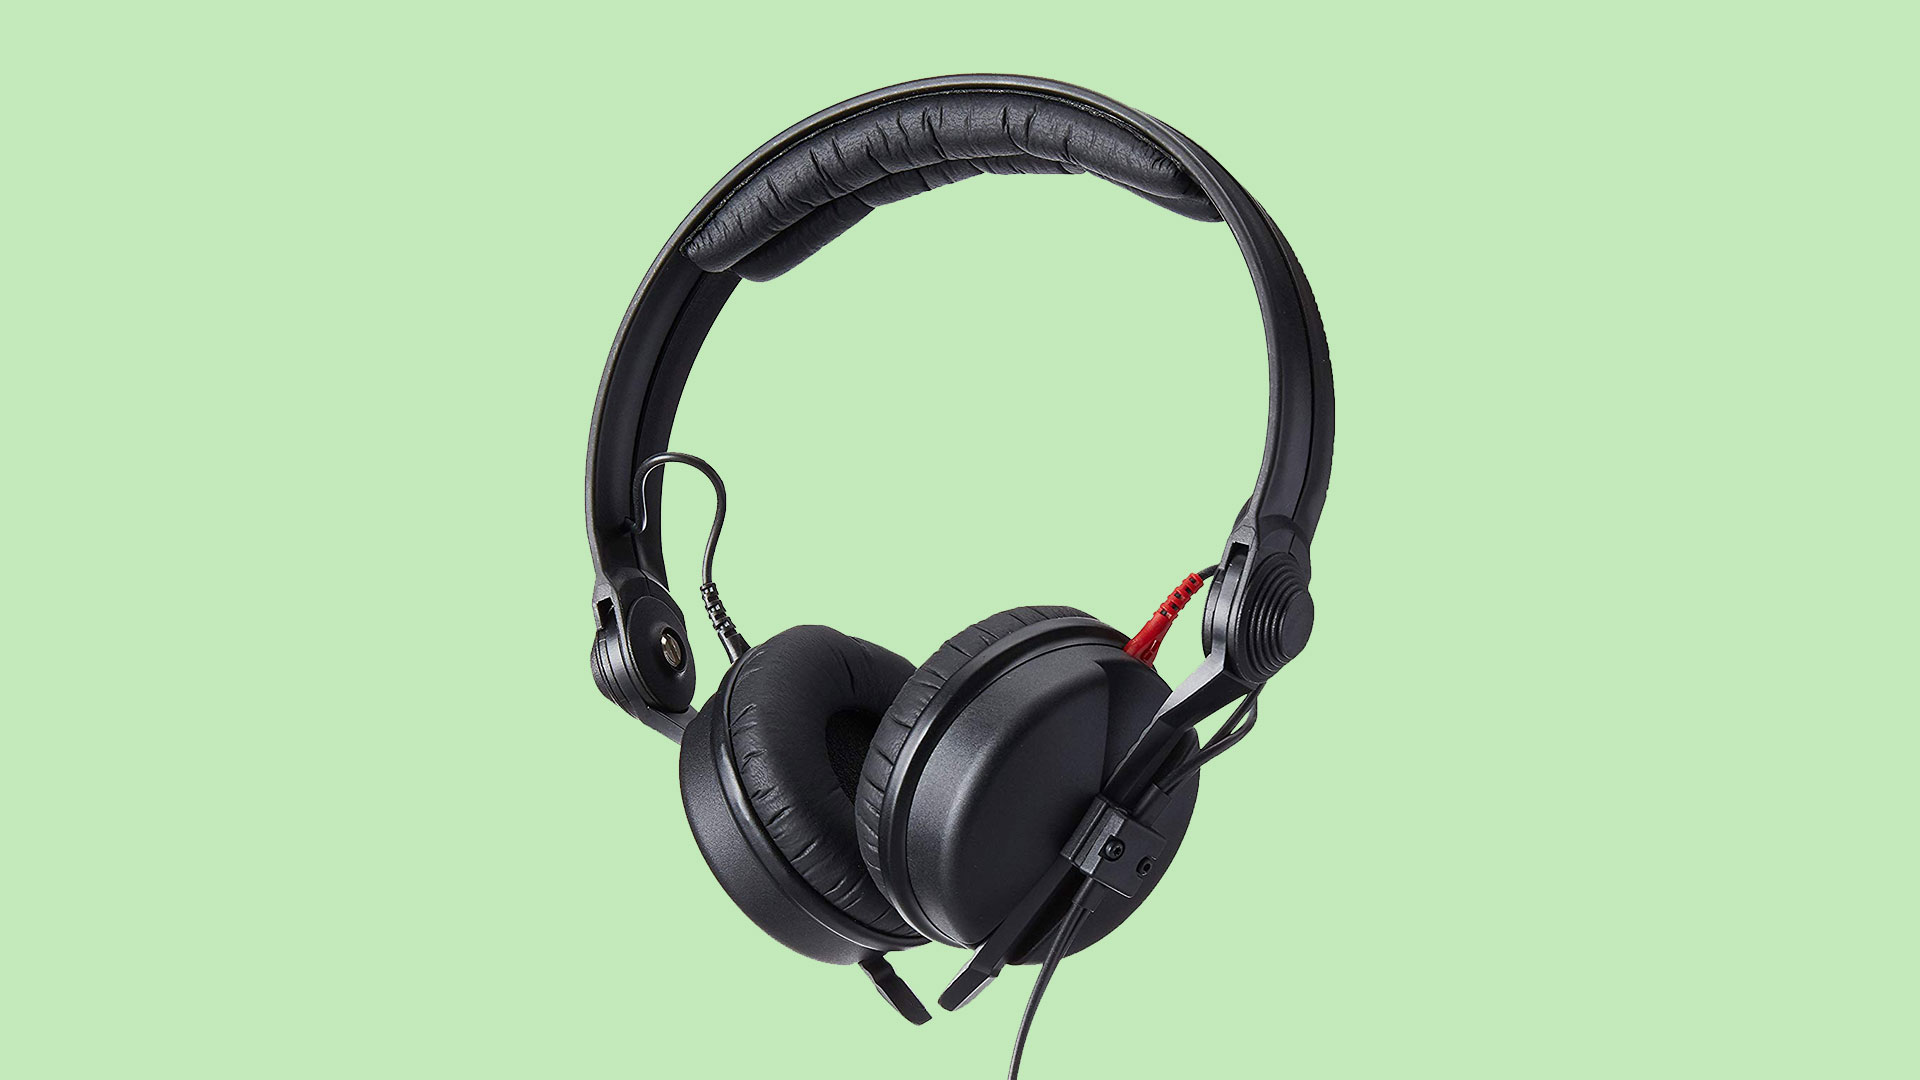 The Sennheiser HD-25 is a good pair of headphones for podcasting and listening to bass-heavy music.